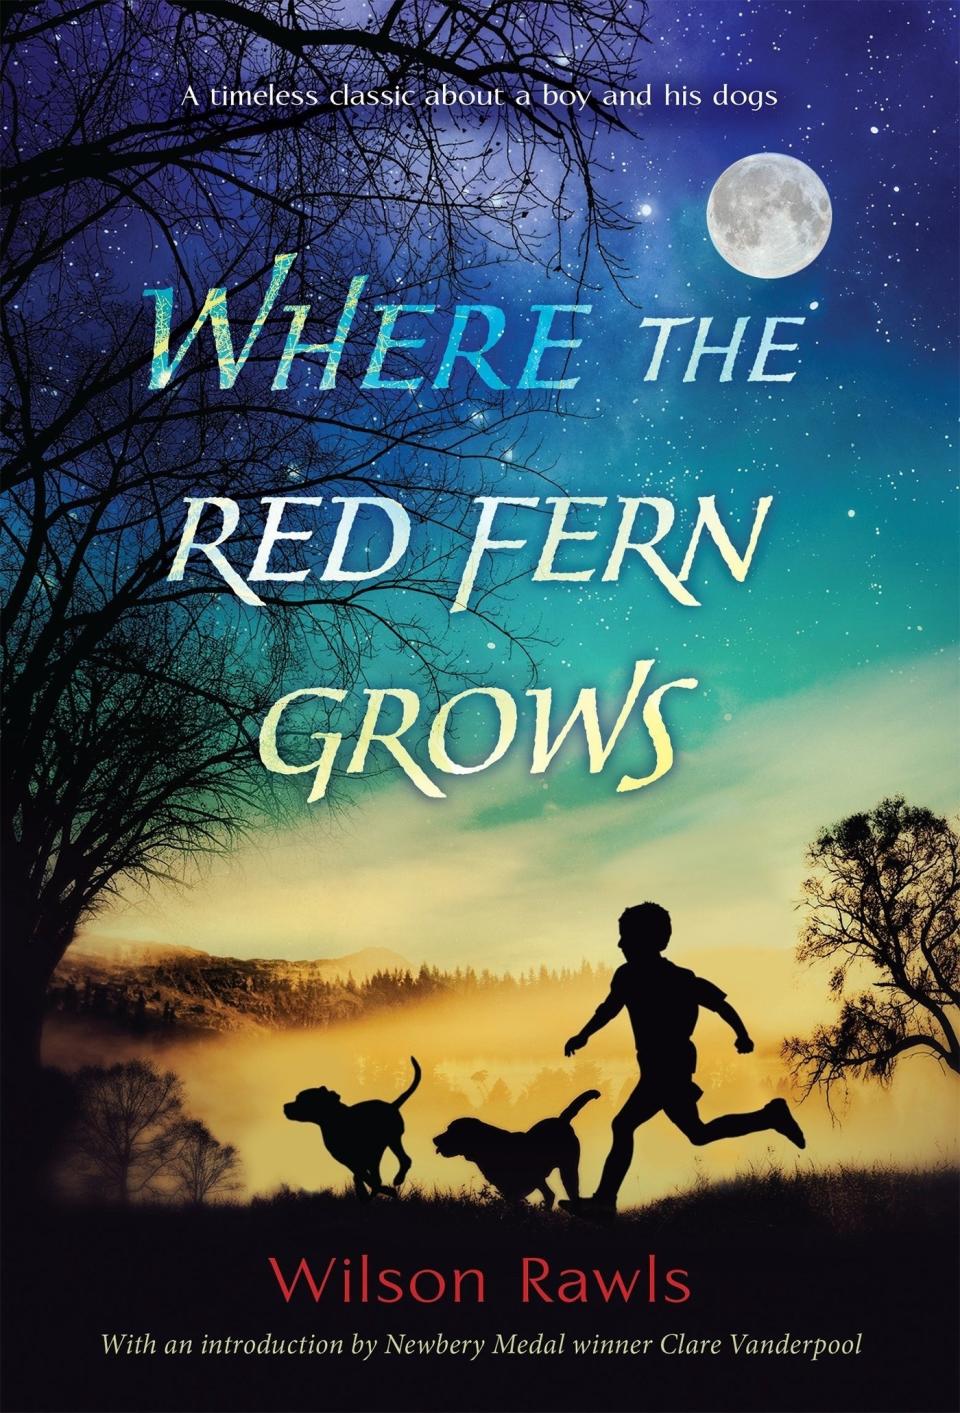 The cover of "Where The Red Fern Grows" by Wilson Rawls